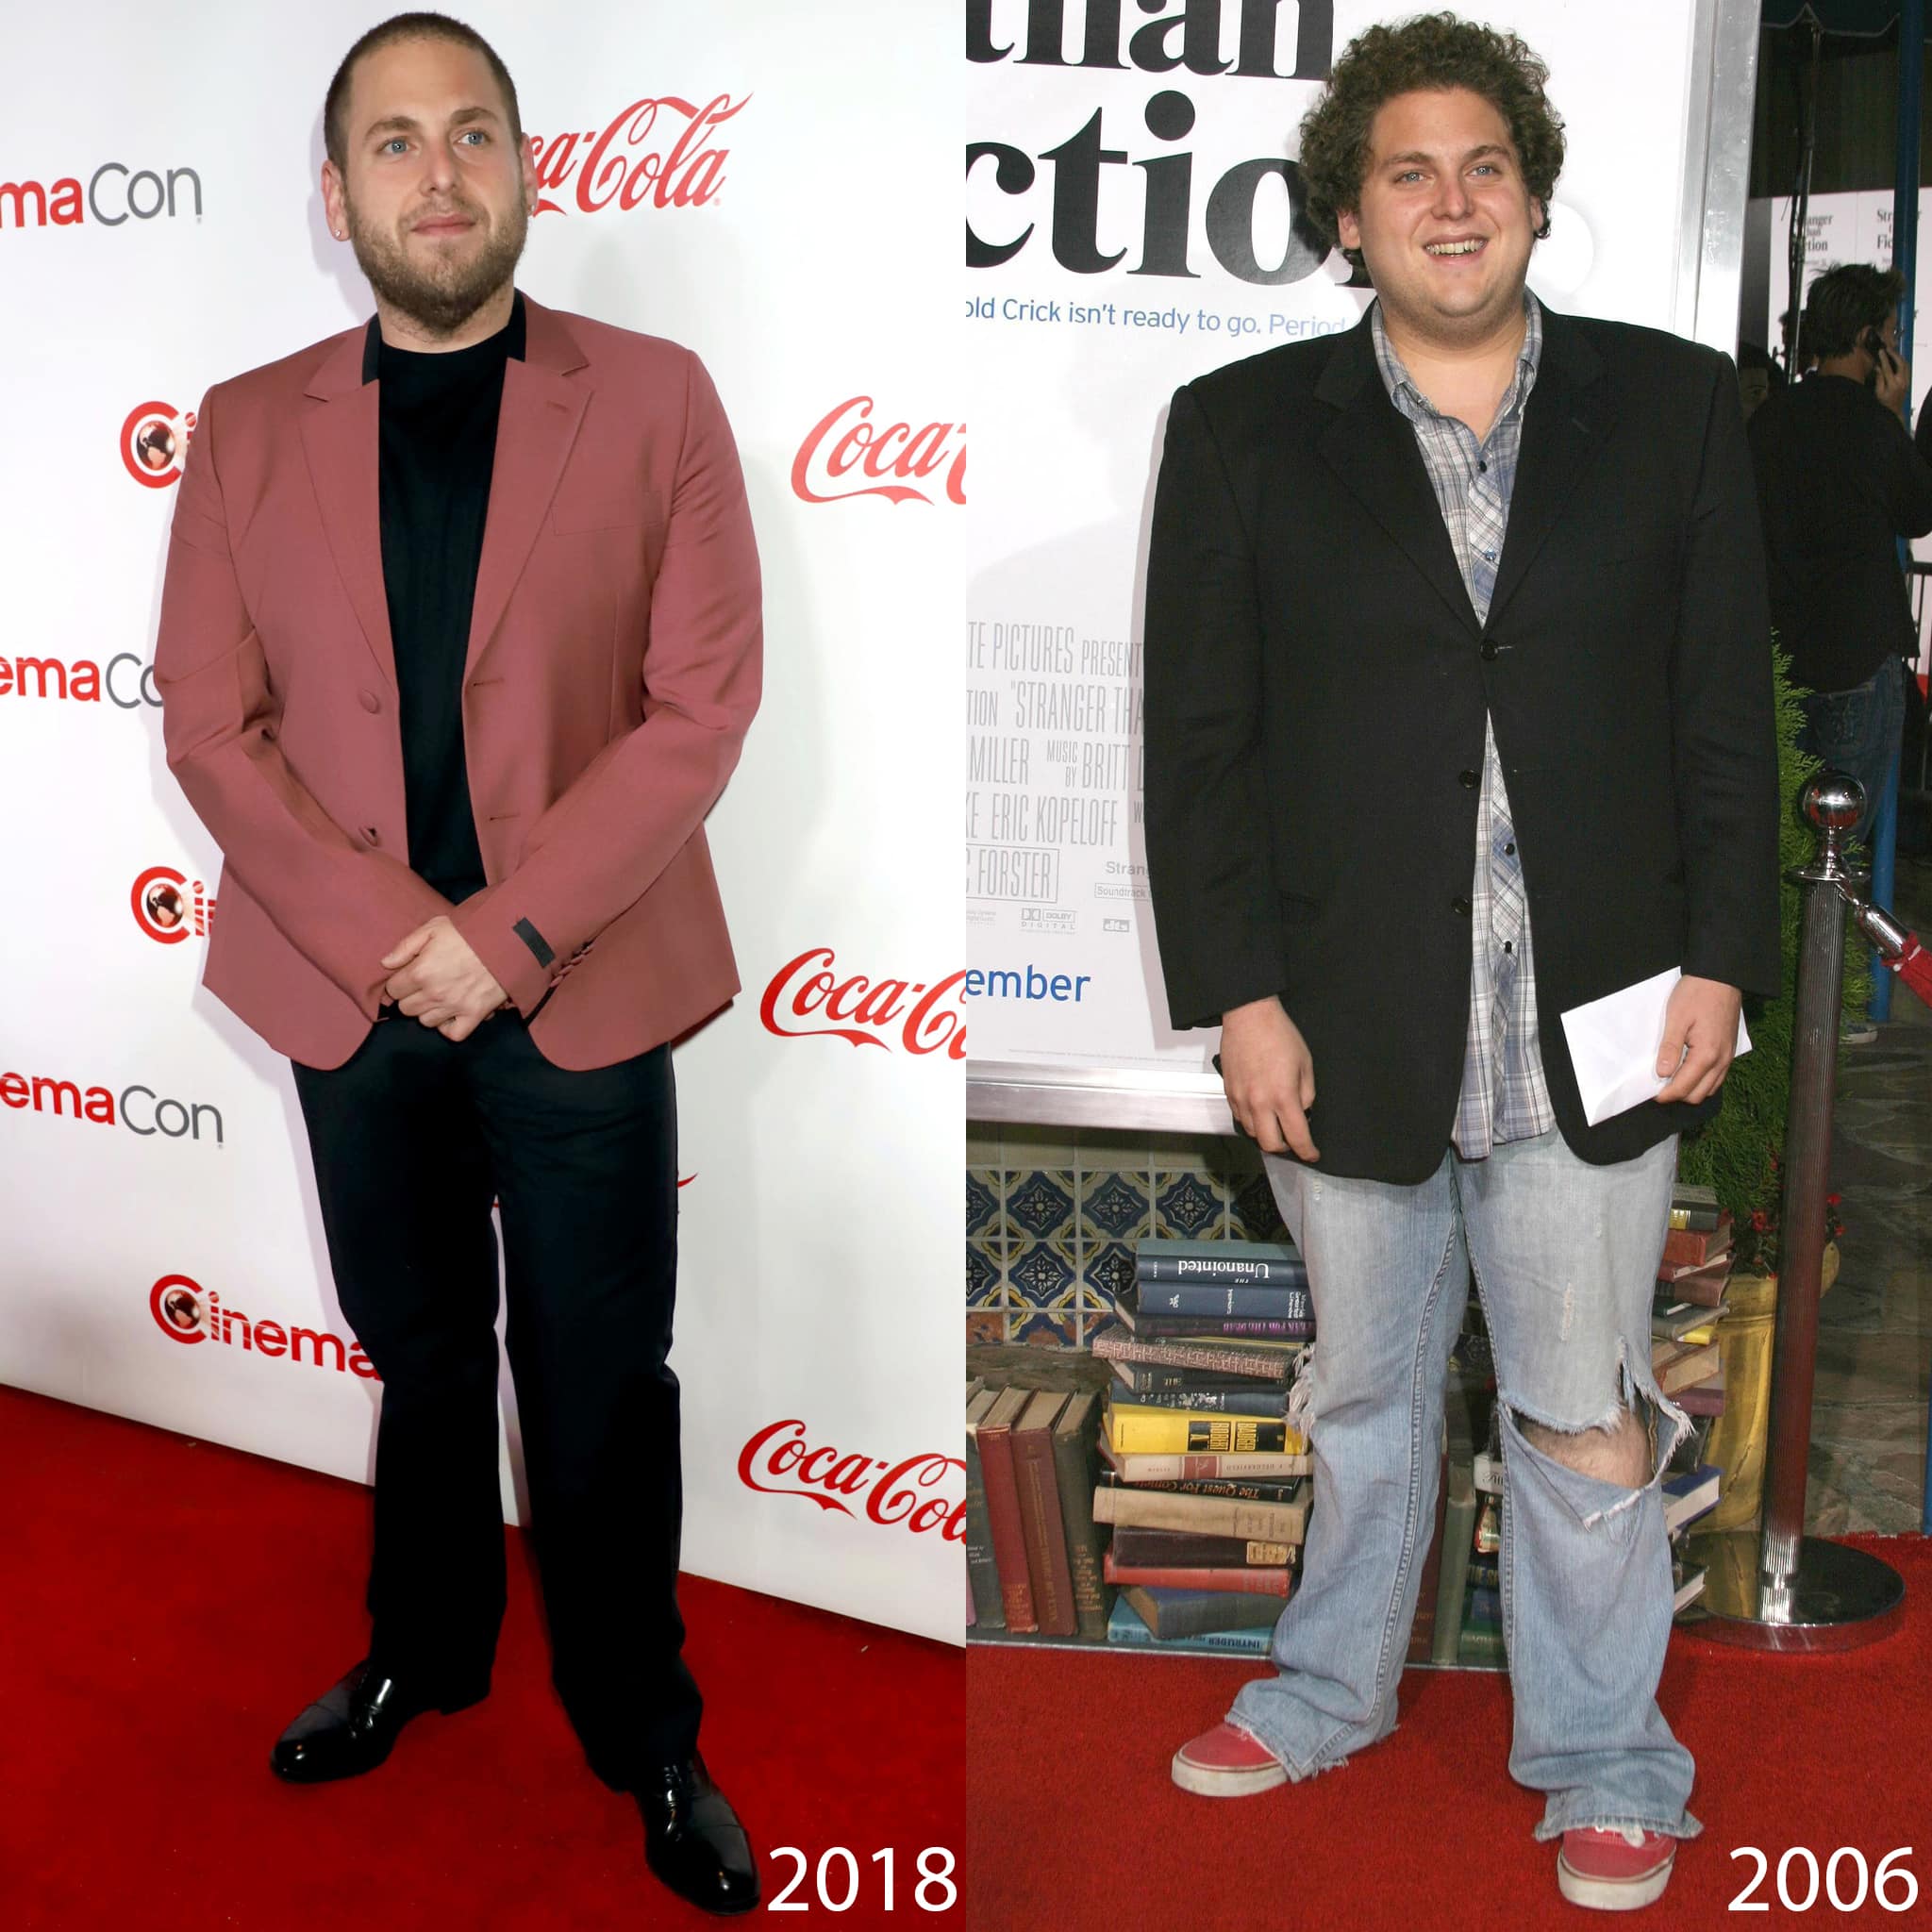 Jonah Hill has shed extra weight since stepping into the Hollywood spotlight in the early 2000s